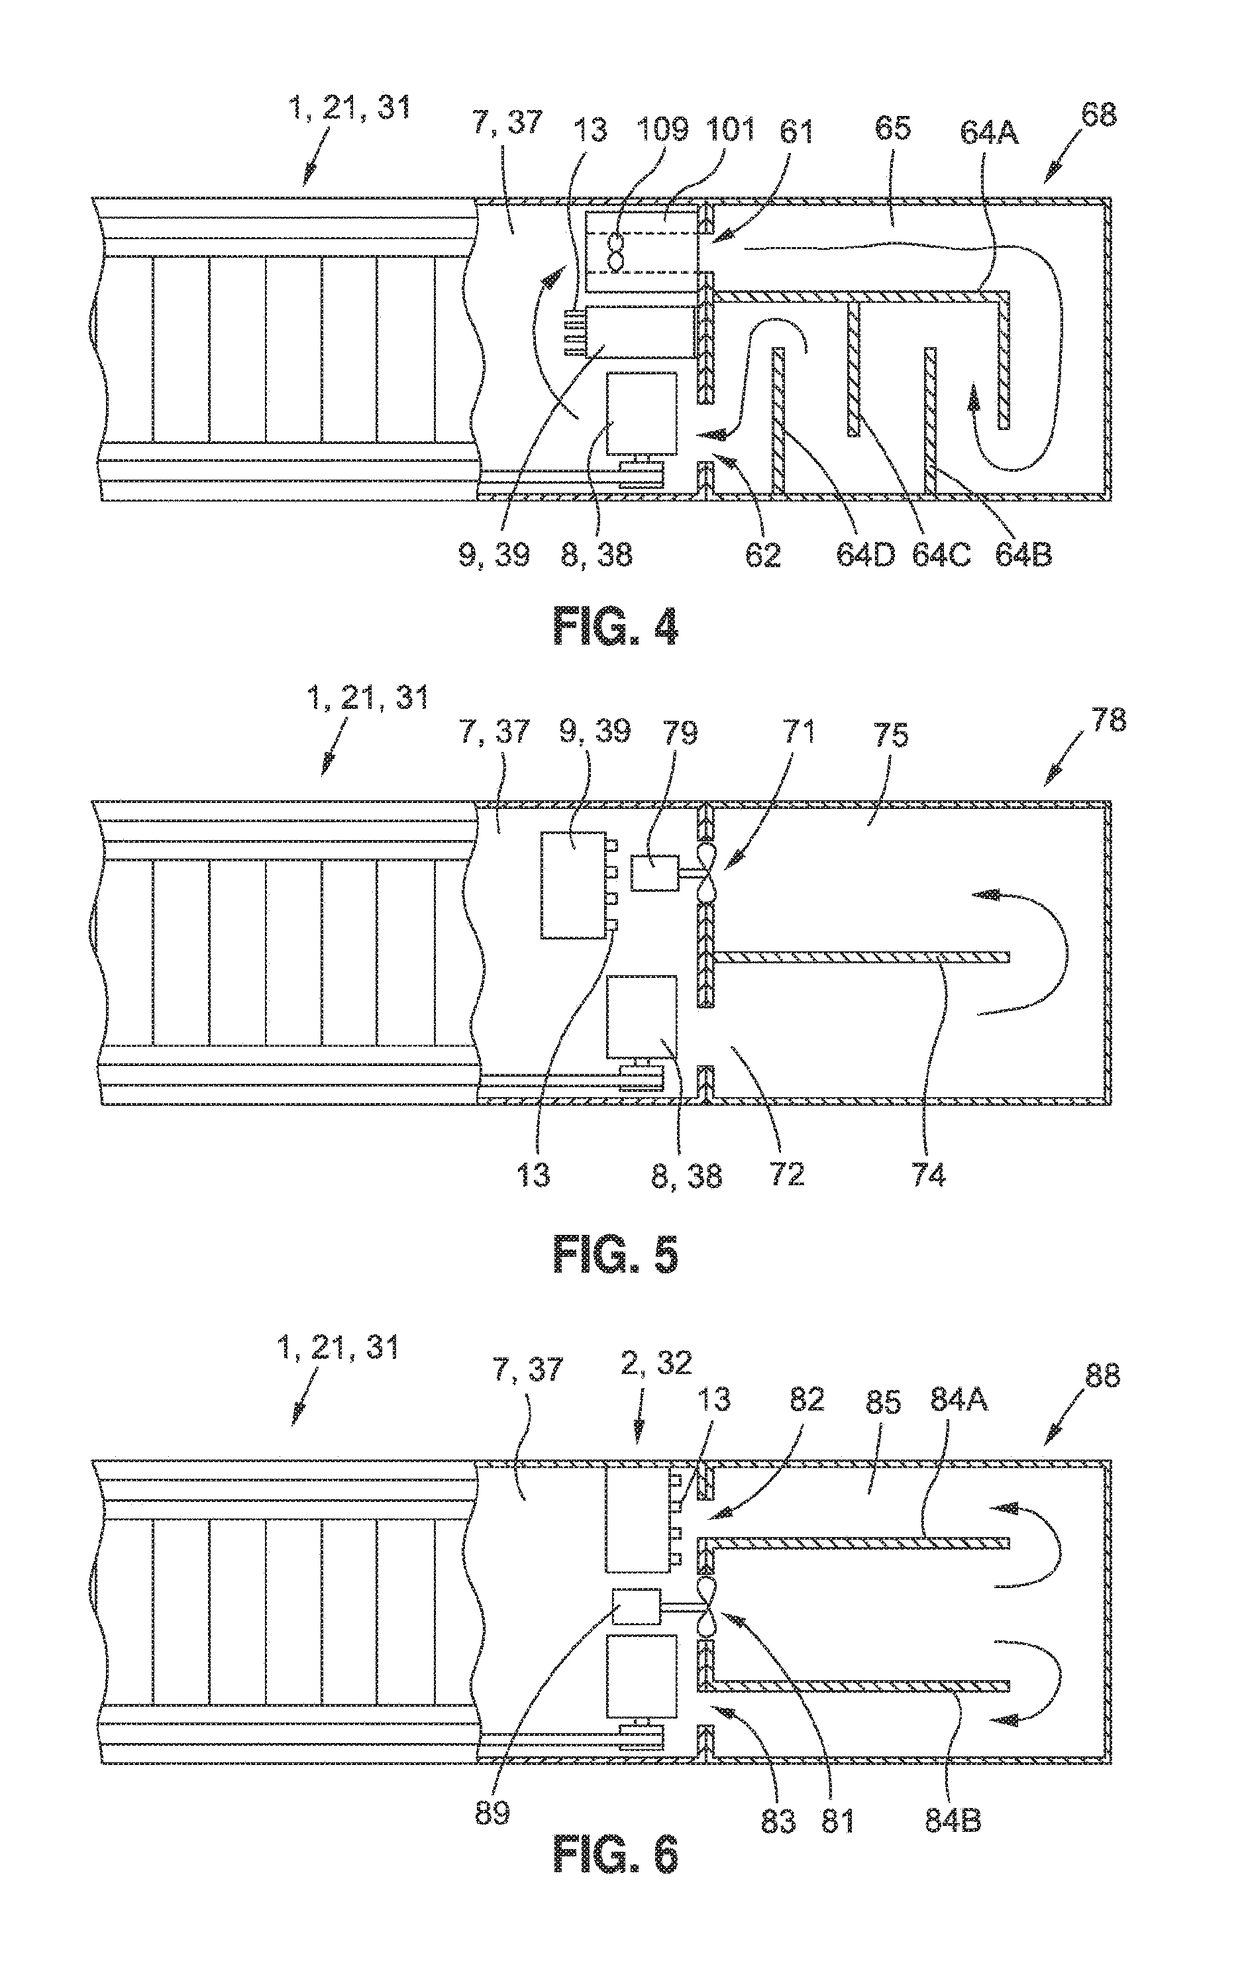 Escalator or moving walkway with at least one access module